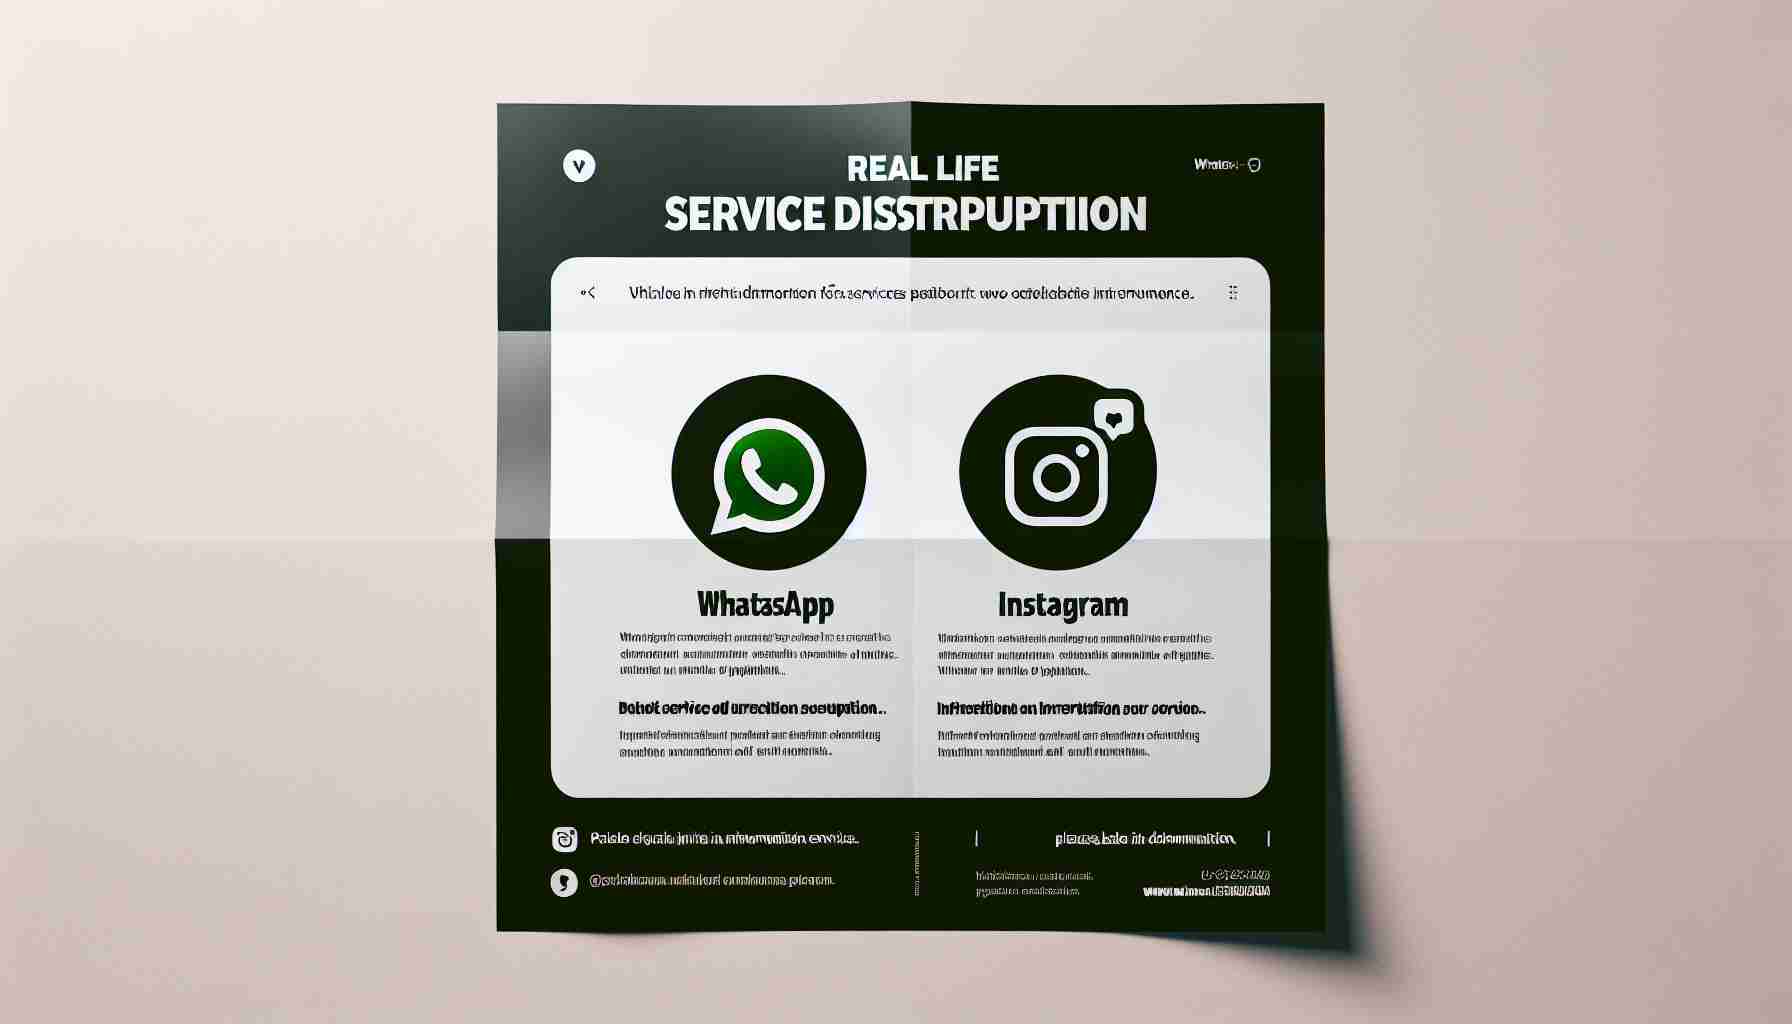 WhatsApp and Instagram Experience Service Disruptions